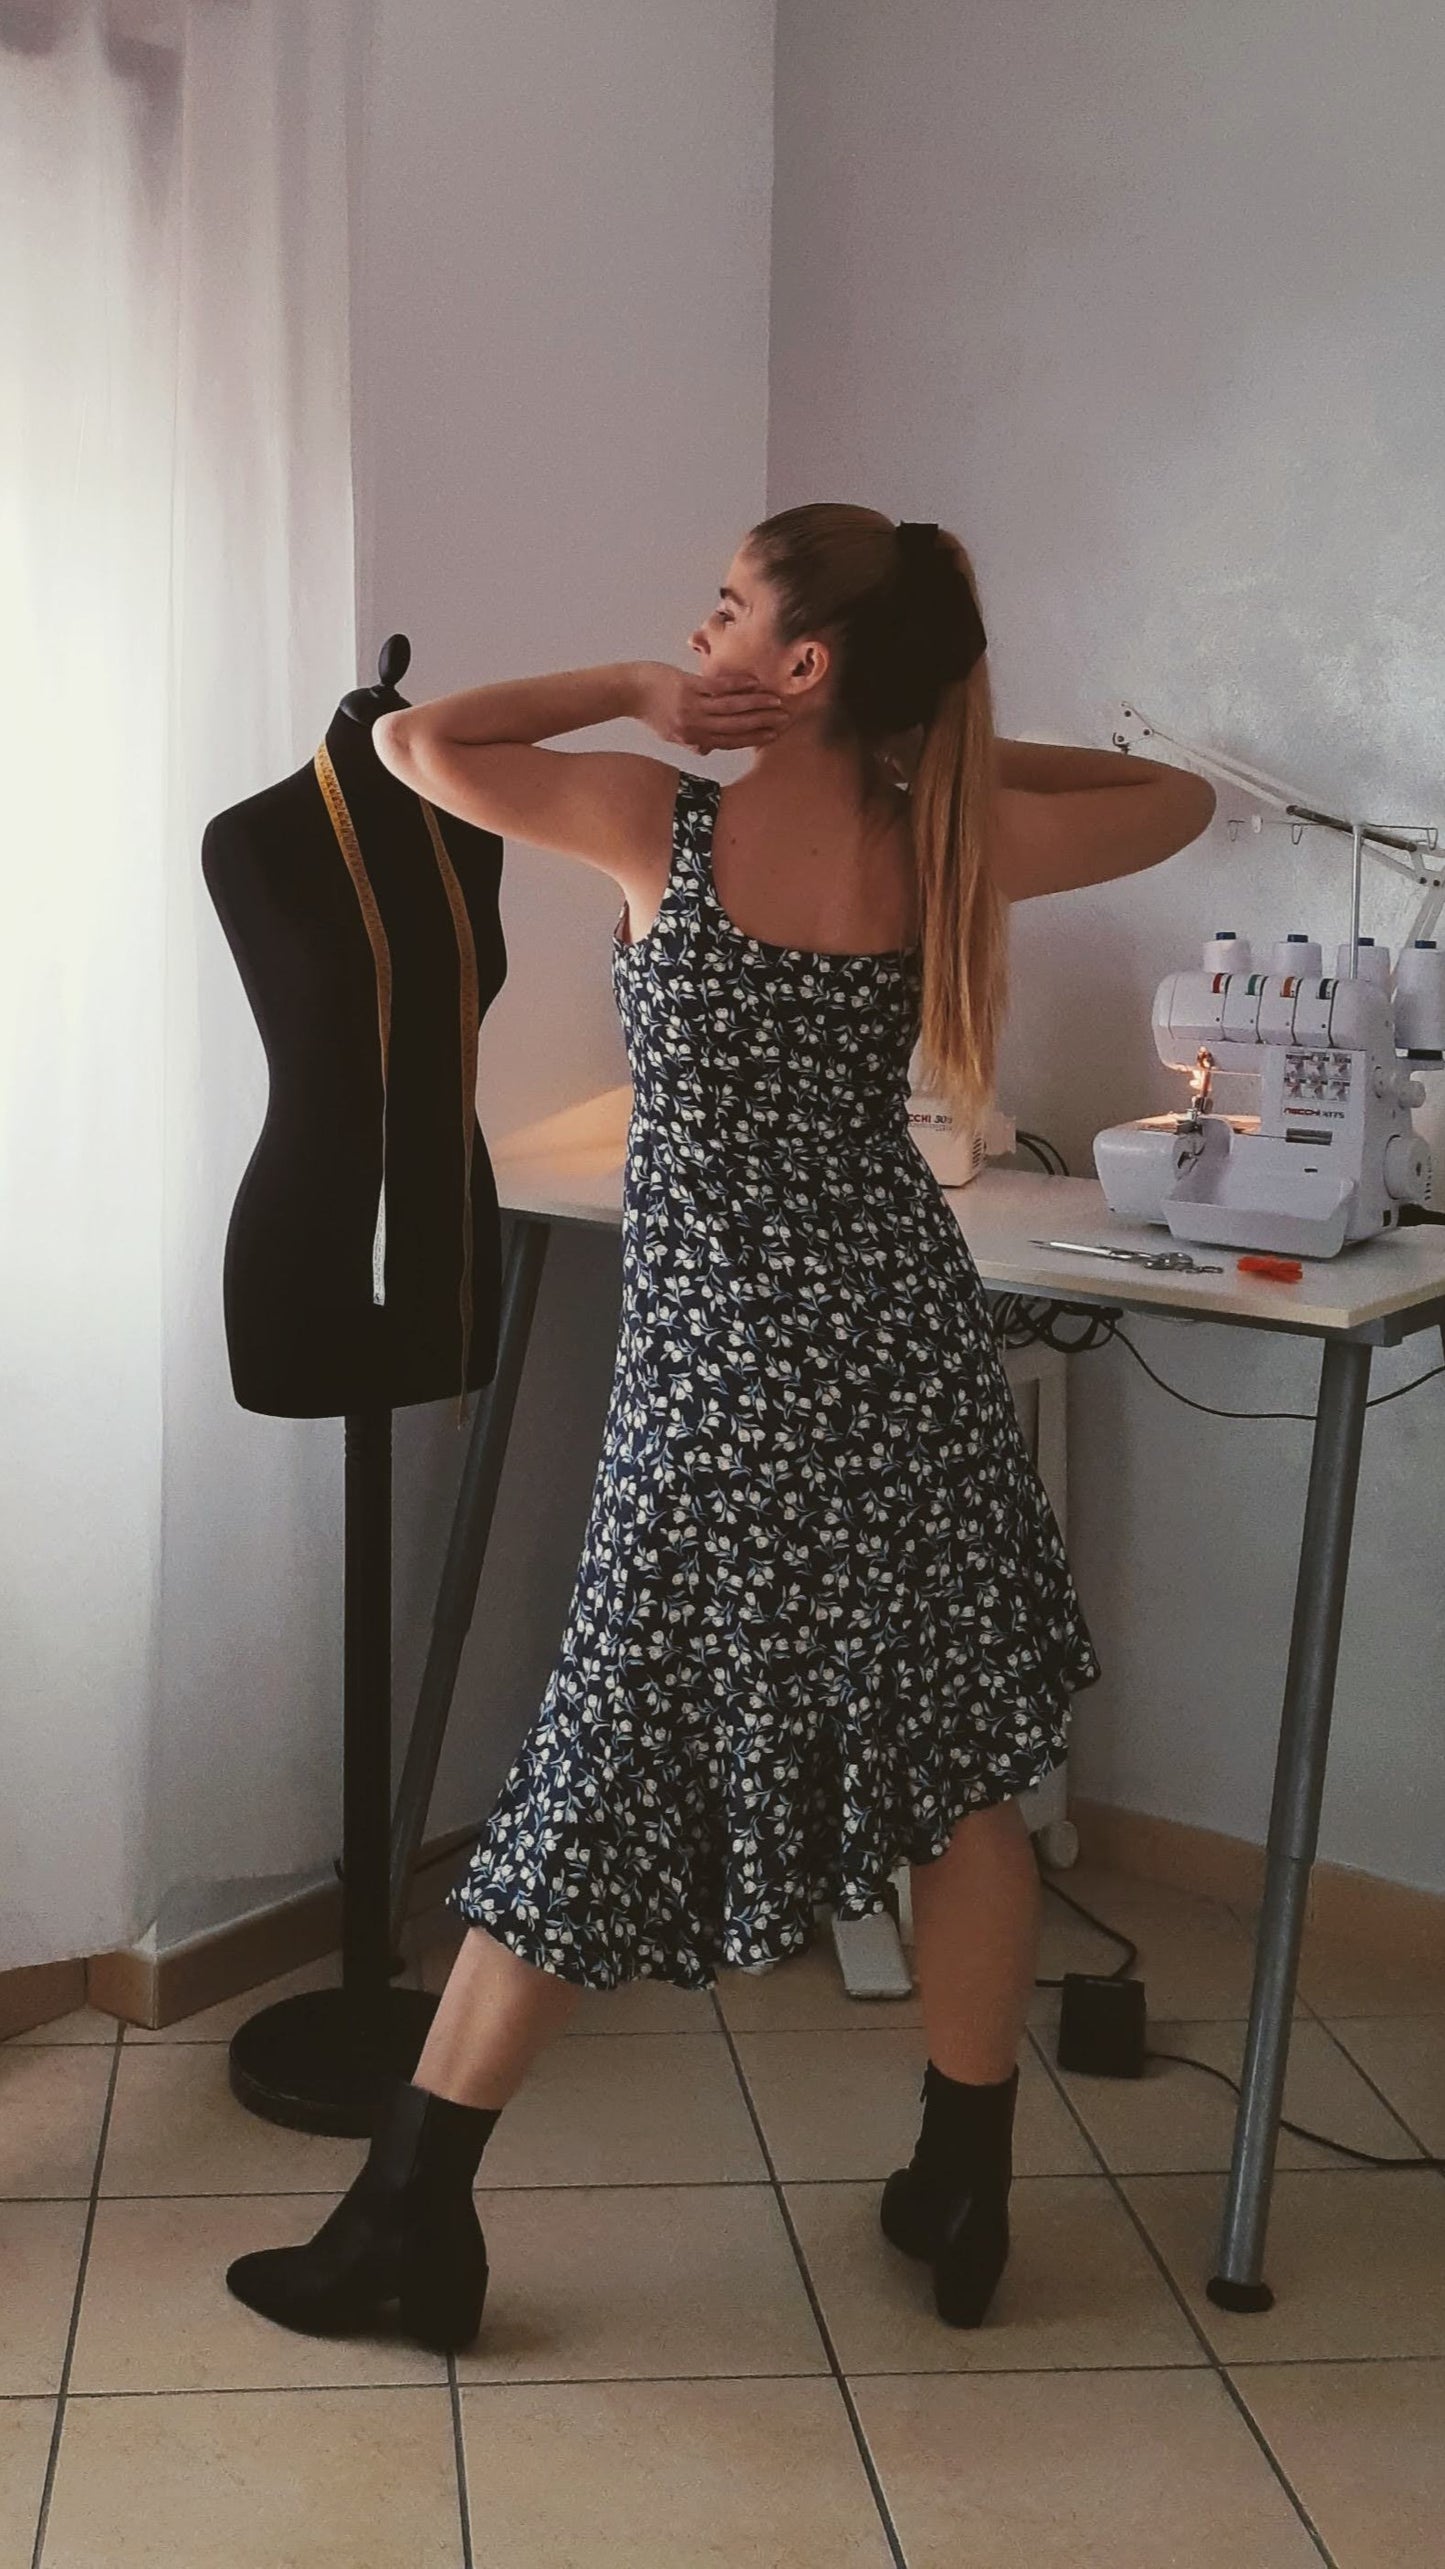 A woman with a ponytail is posing in a asymmetric sleeveless dress and black boots. The view is from the back.